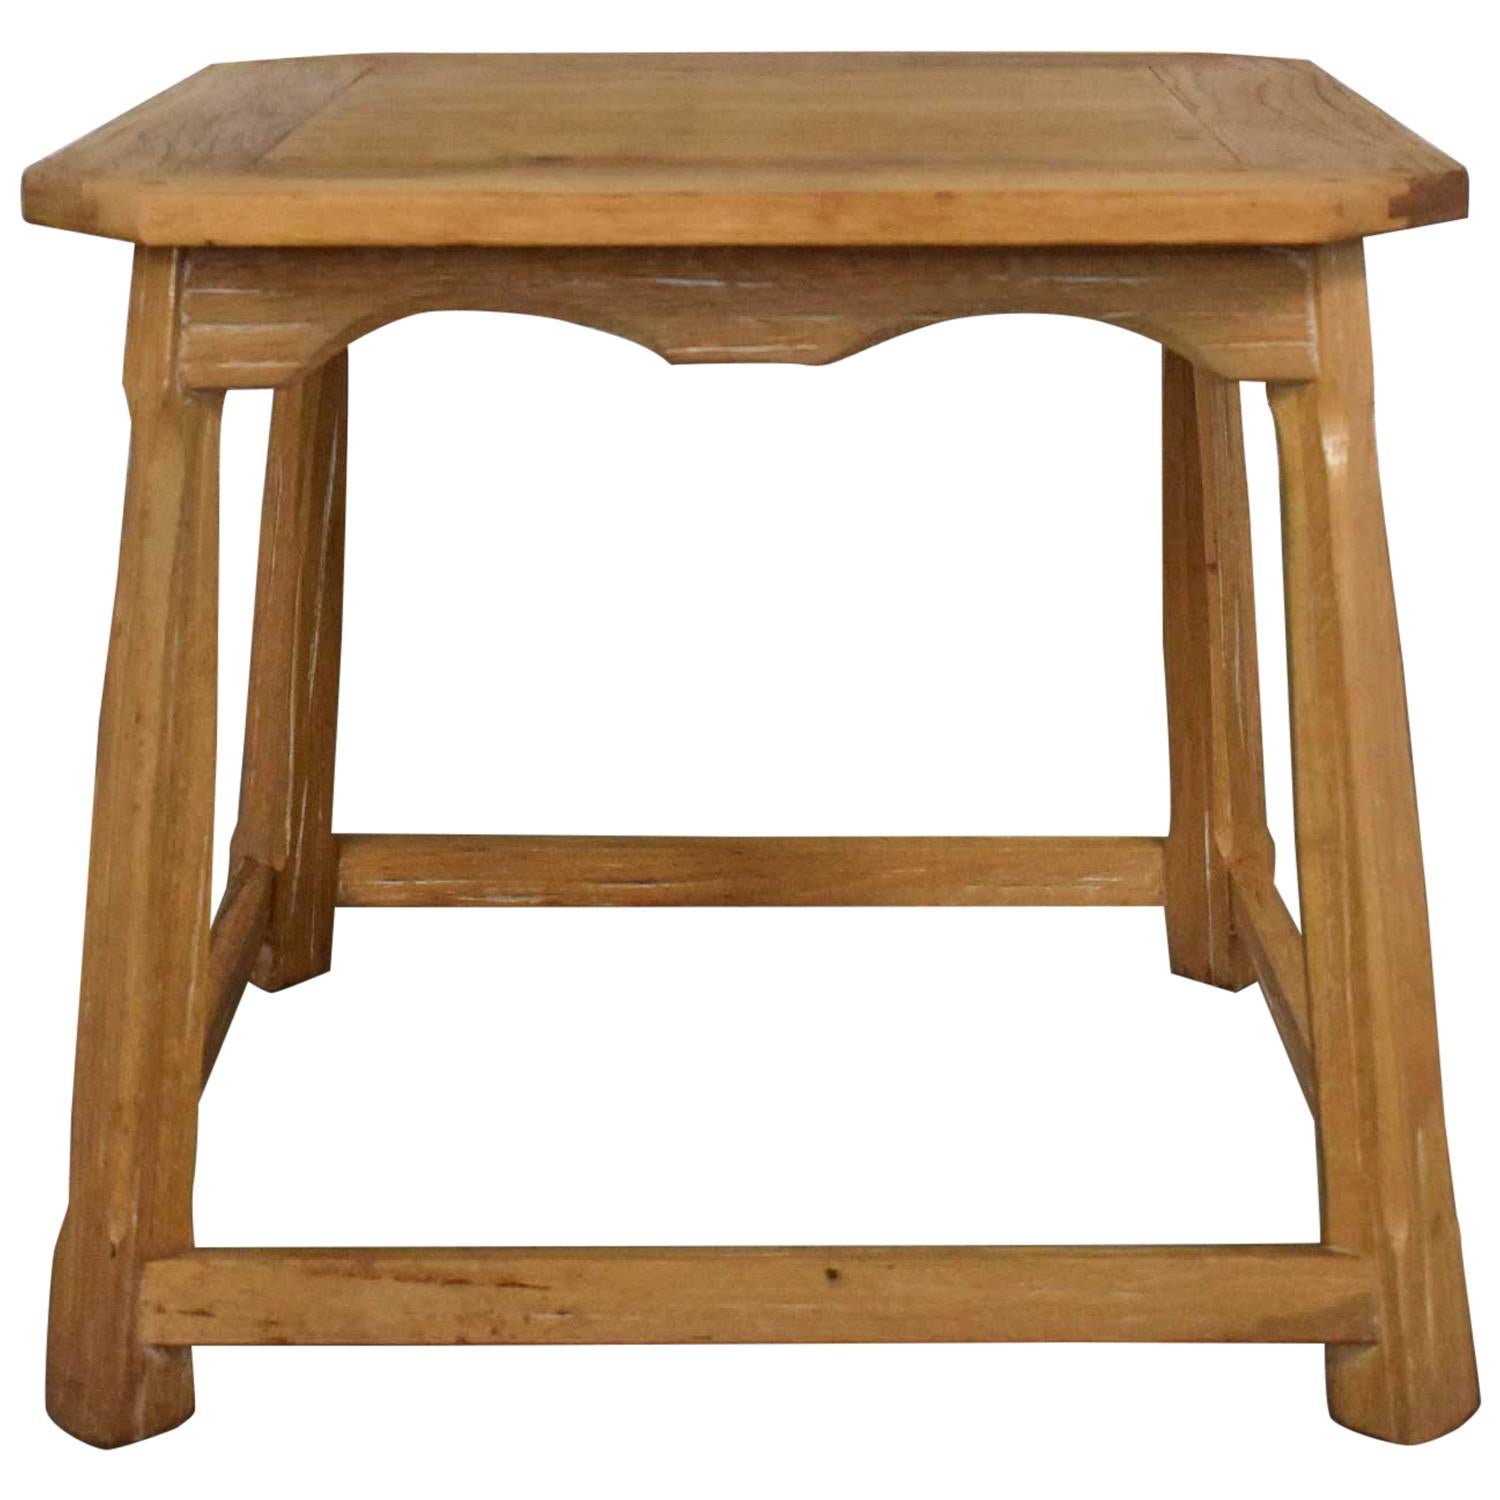 Larger Ranch Oak Lamp Table End Table Natural Oak Finish by A. Brandt Company